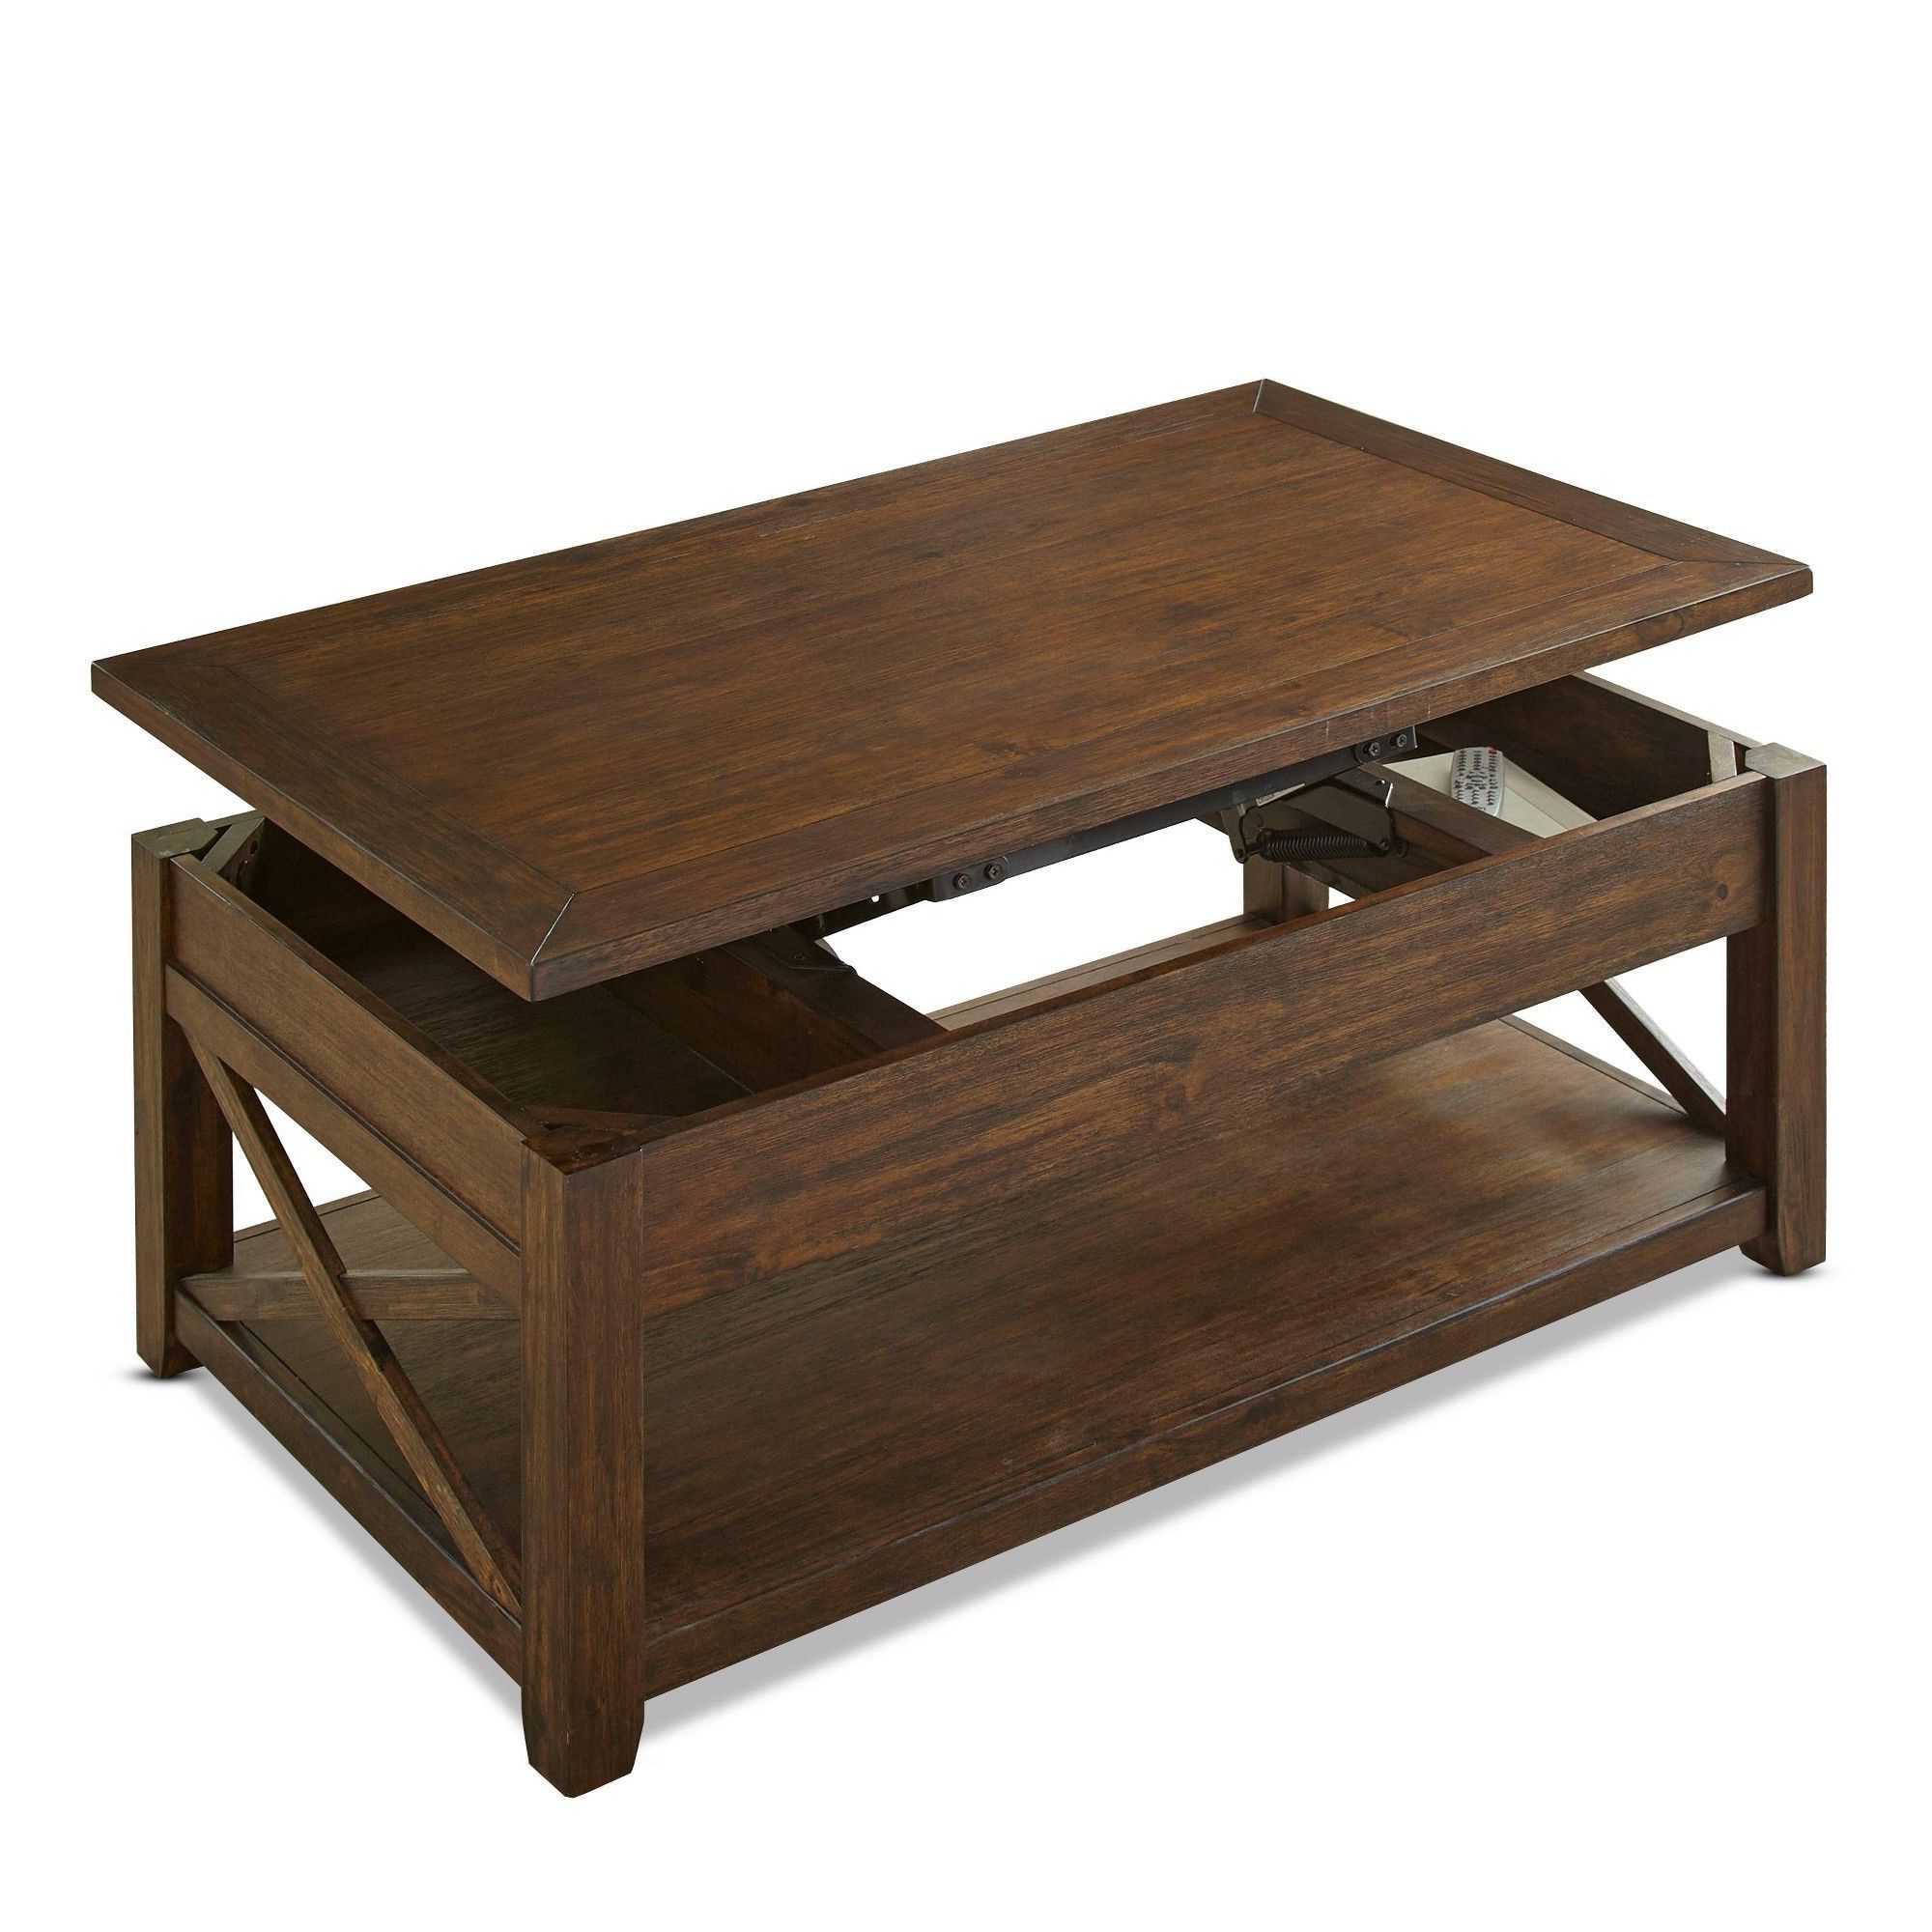 Widely Used Rustic Lenka Lift Top Cocktail Table Mocha Finish – Steve Regarding Rustic Bronze Patina Coffee Tables (View 11 of 20)